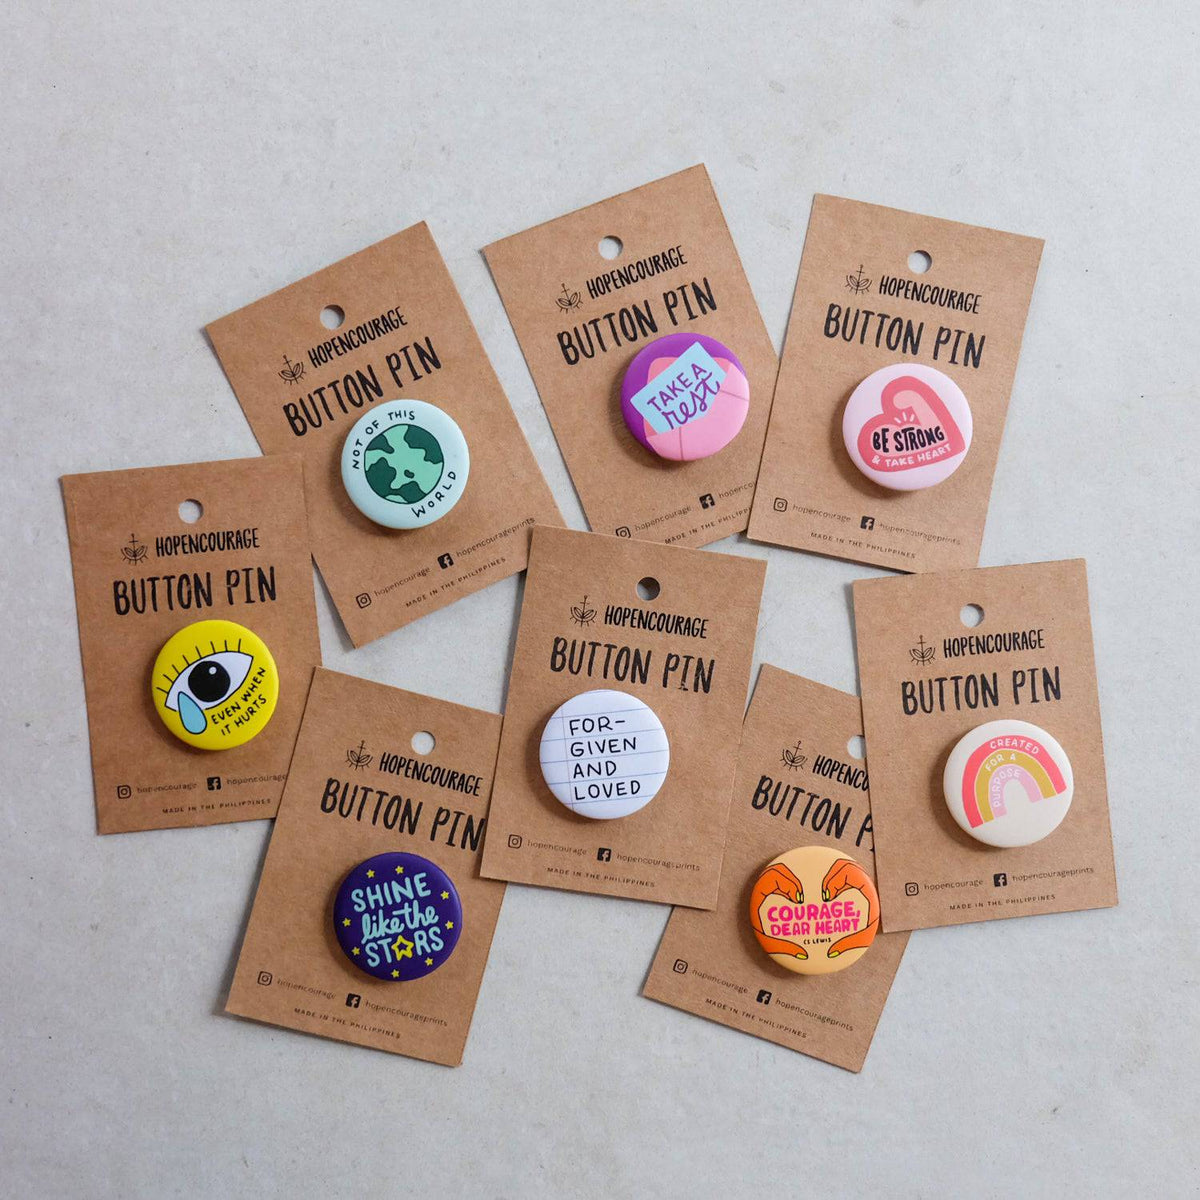 Button Pins by Artsyology